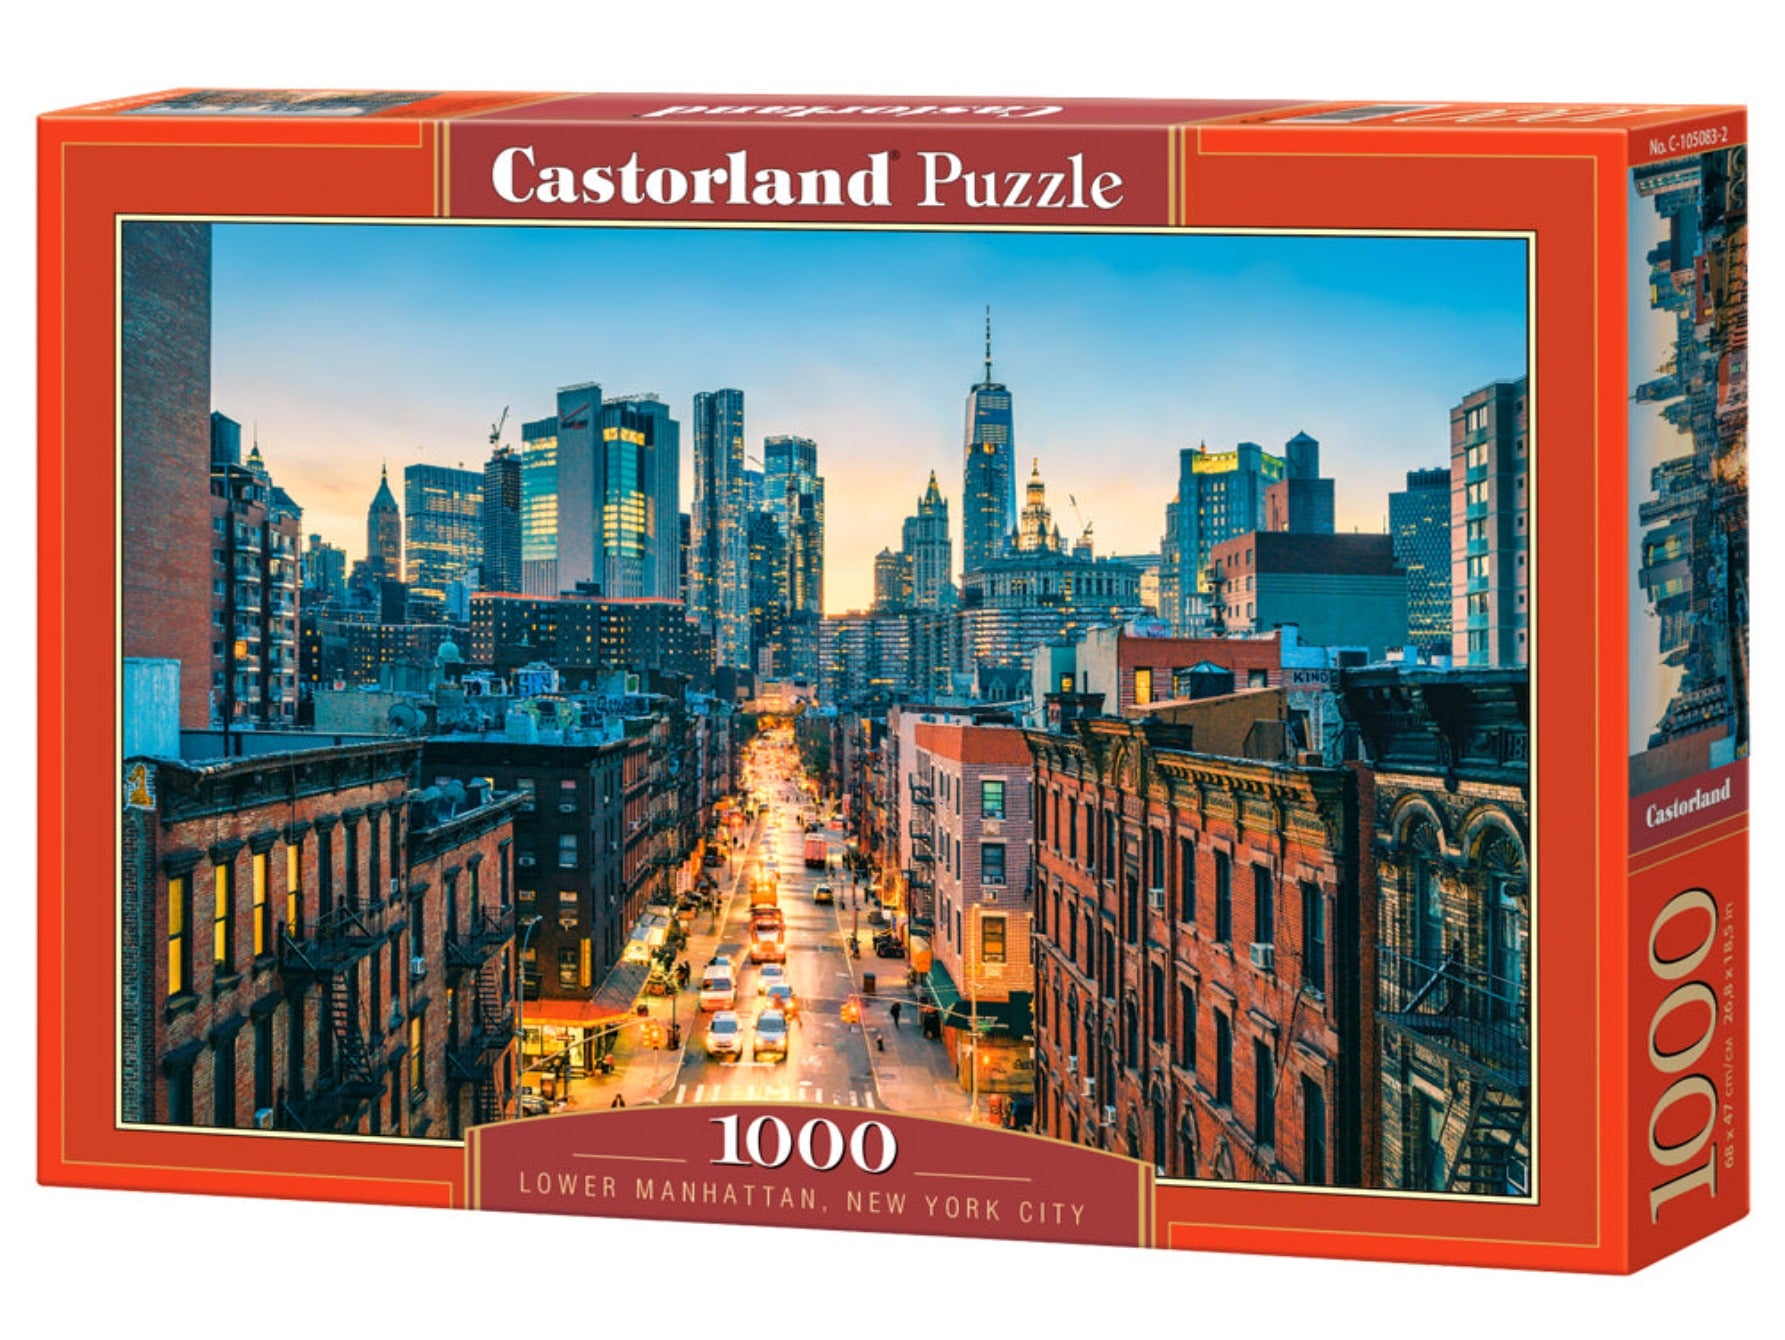 CASTORLAND 1000 Piece Jigsaw Puzzles, Lower Manhattan, New York City , NYC, City view puzzle,  USA puzzles, Adult